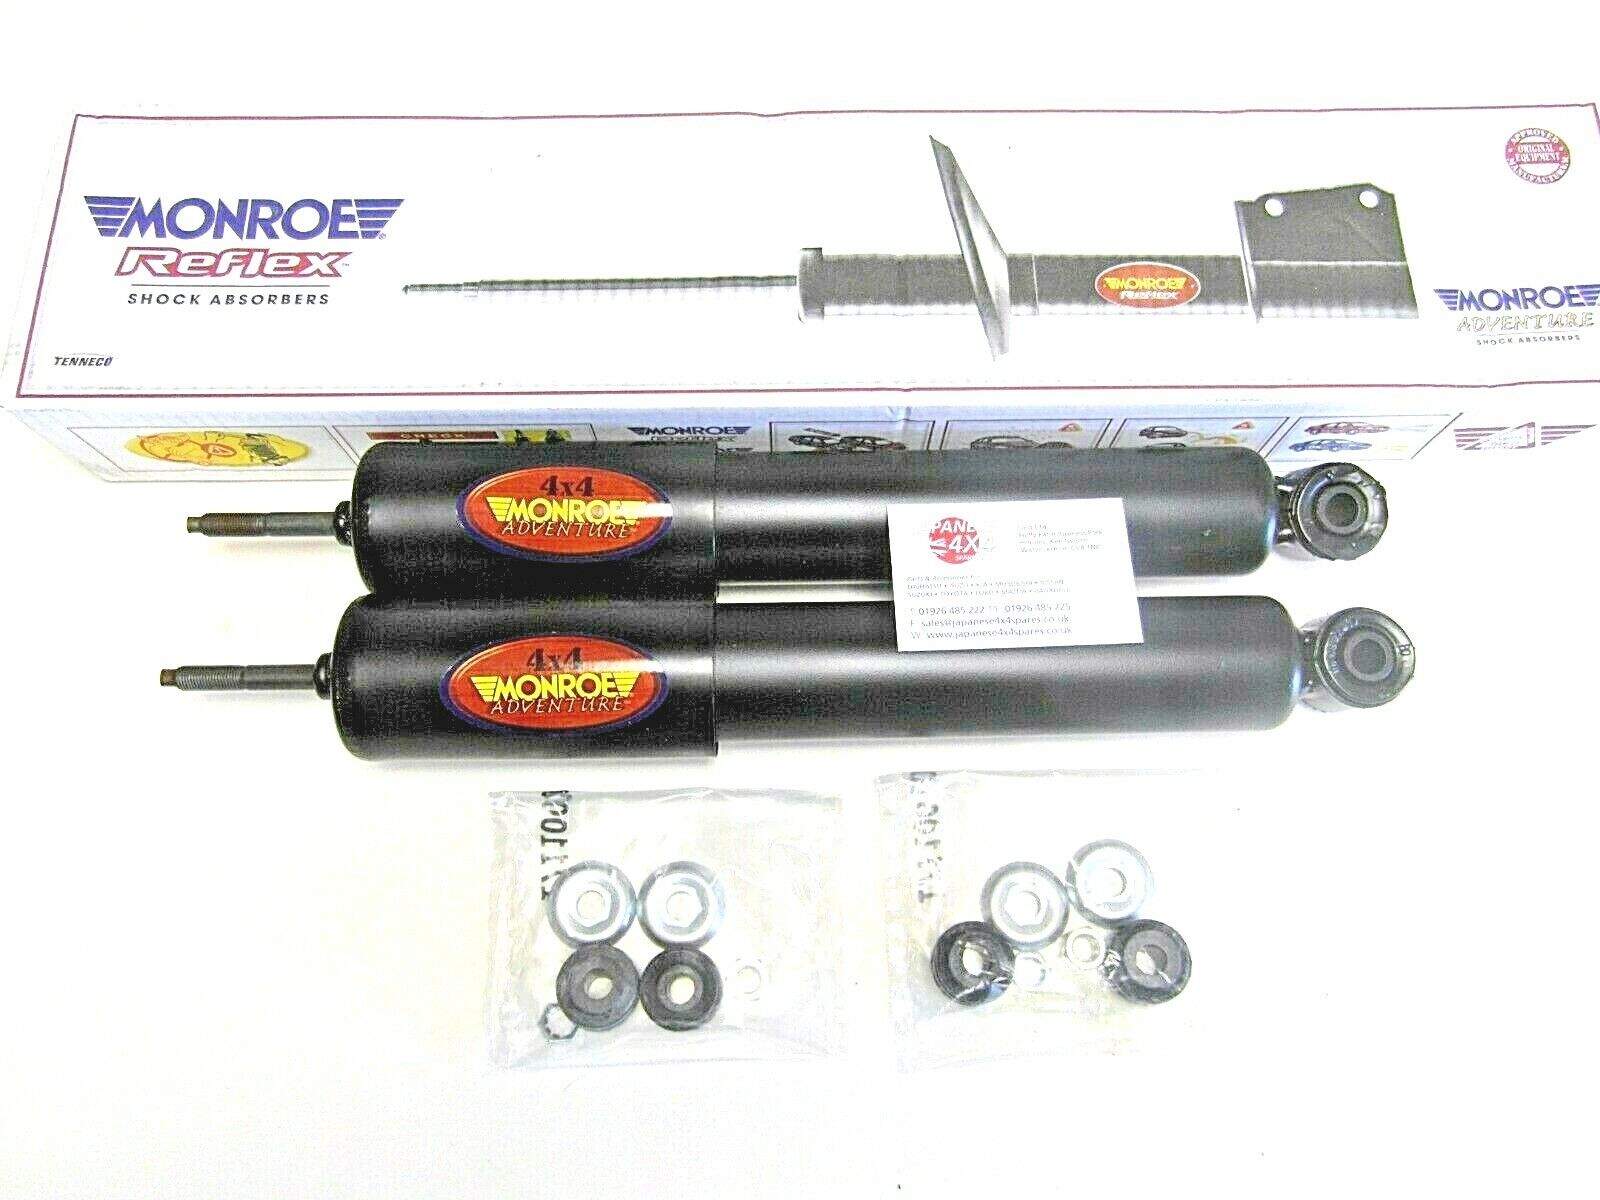 FORD MAVERICK  2 x Monroe Front Shock Absorbers fits NISSAN TERRANO